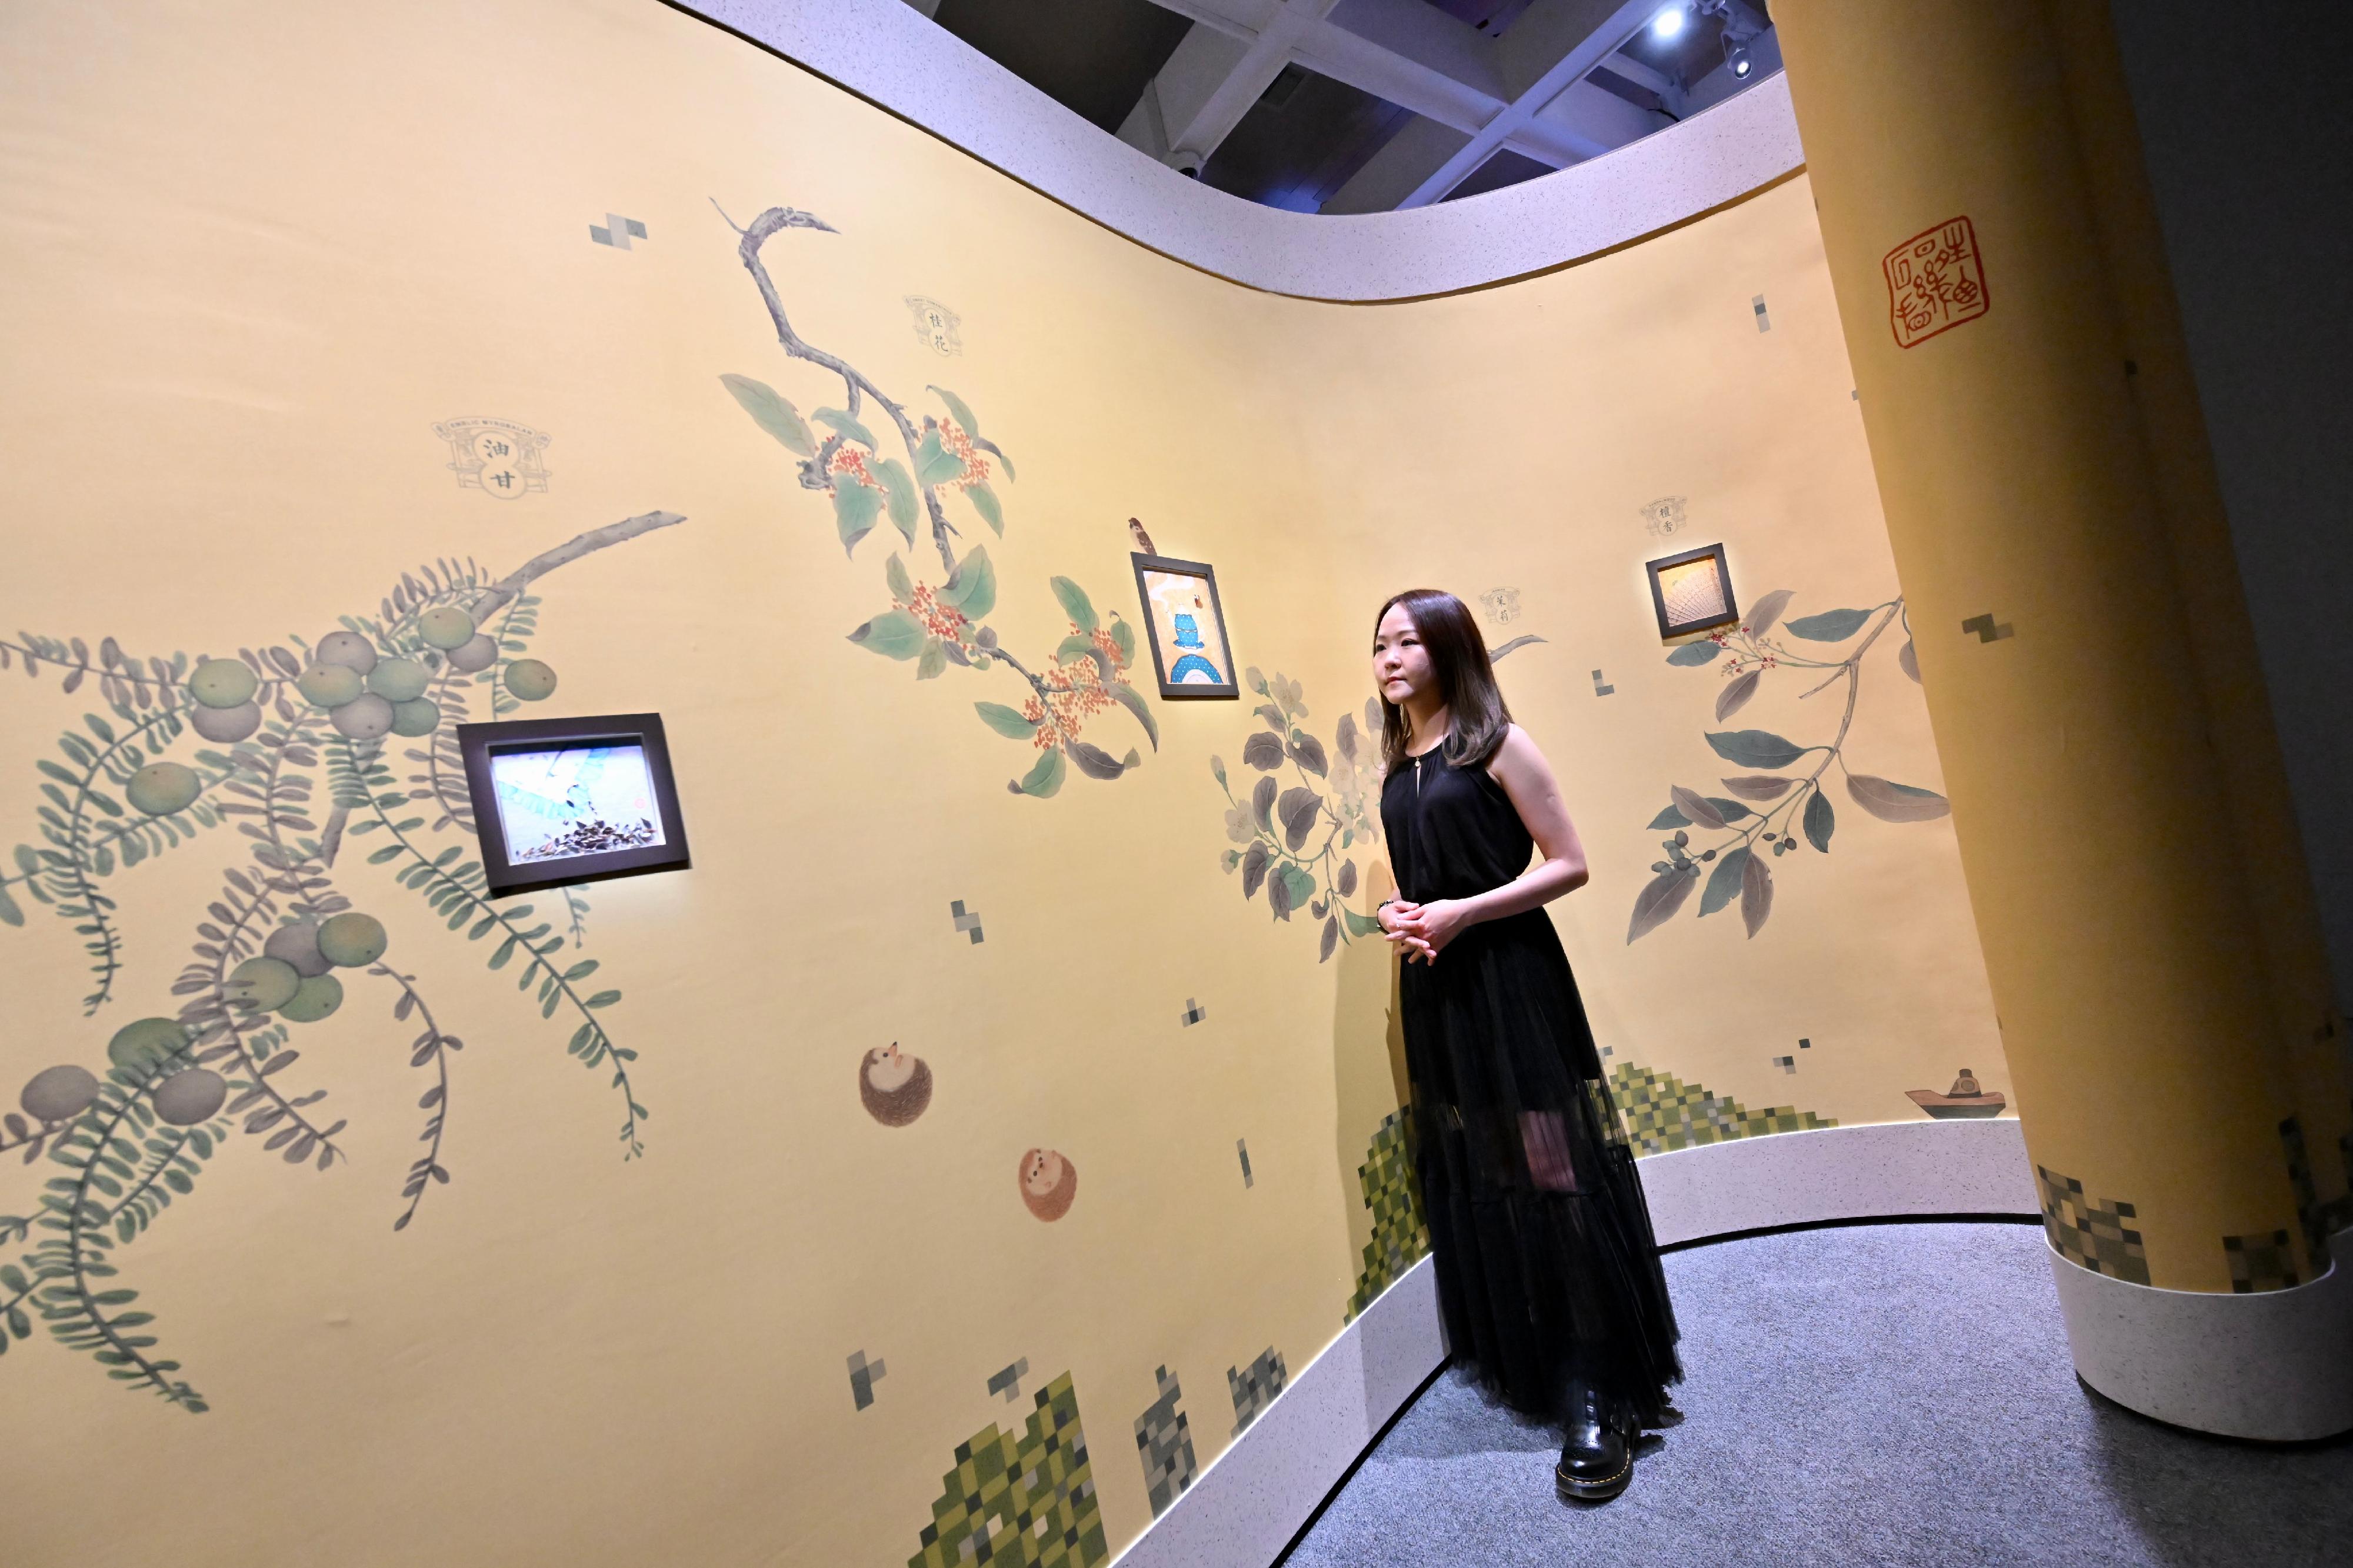 The opening ceremony of the "The Hong Kong Jockey Club Series: Fragrance of Time - In Search of Chinese Art of Scent" exhibition was held today (June 27) at the Hong Kong Museum of Art. Photo shows Hong Kong artist Cheuk Ka-wai and her artwork "Gathering of Ten Fragrances". 